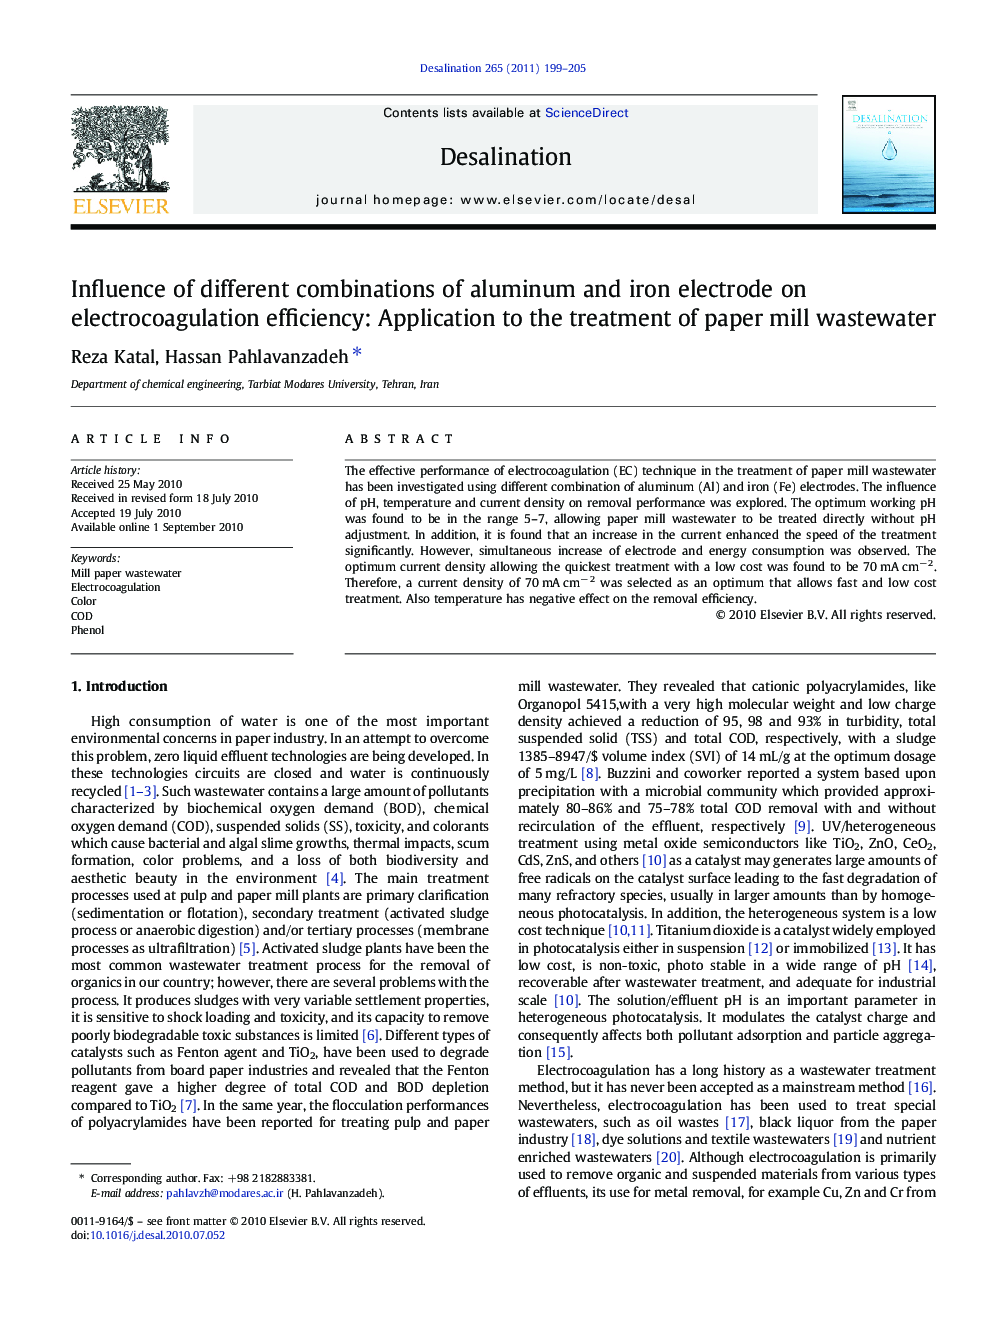 Influence of different combinations of aluminum and iron electrode on electrocoagulation efficiency: Application to the treatment of paper mill wastewater